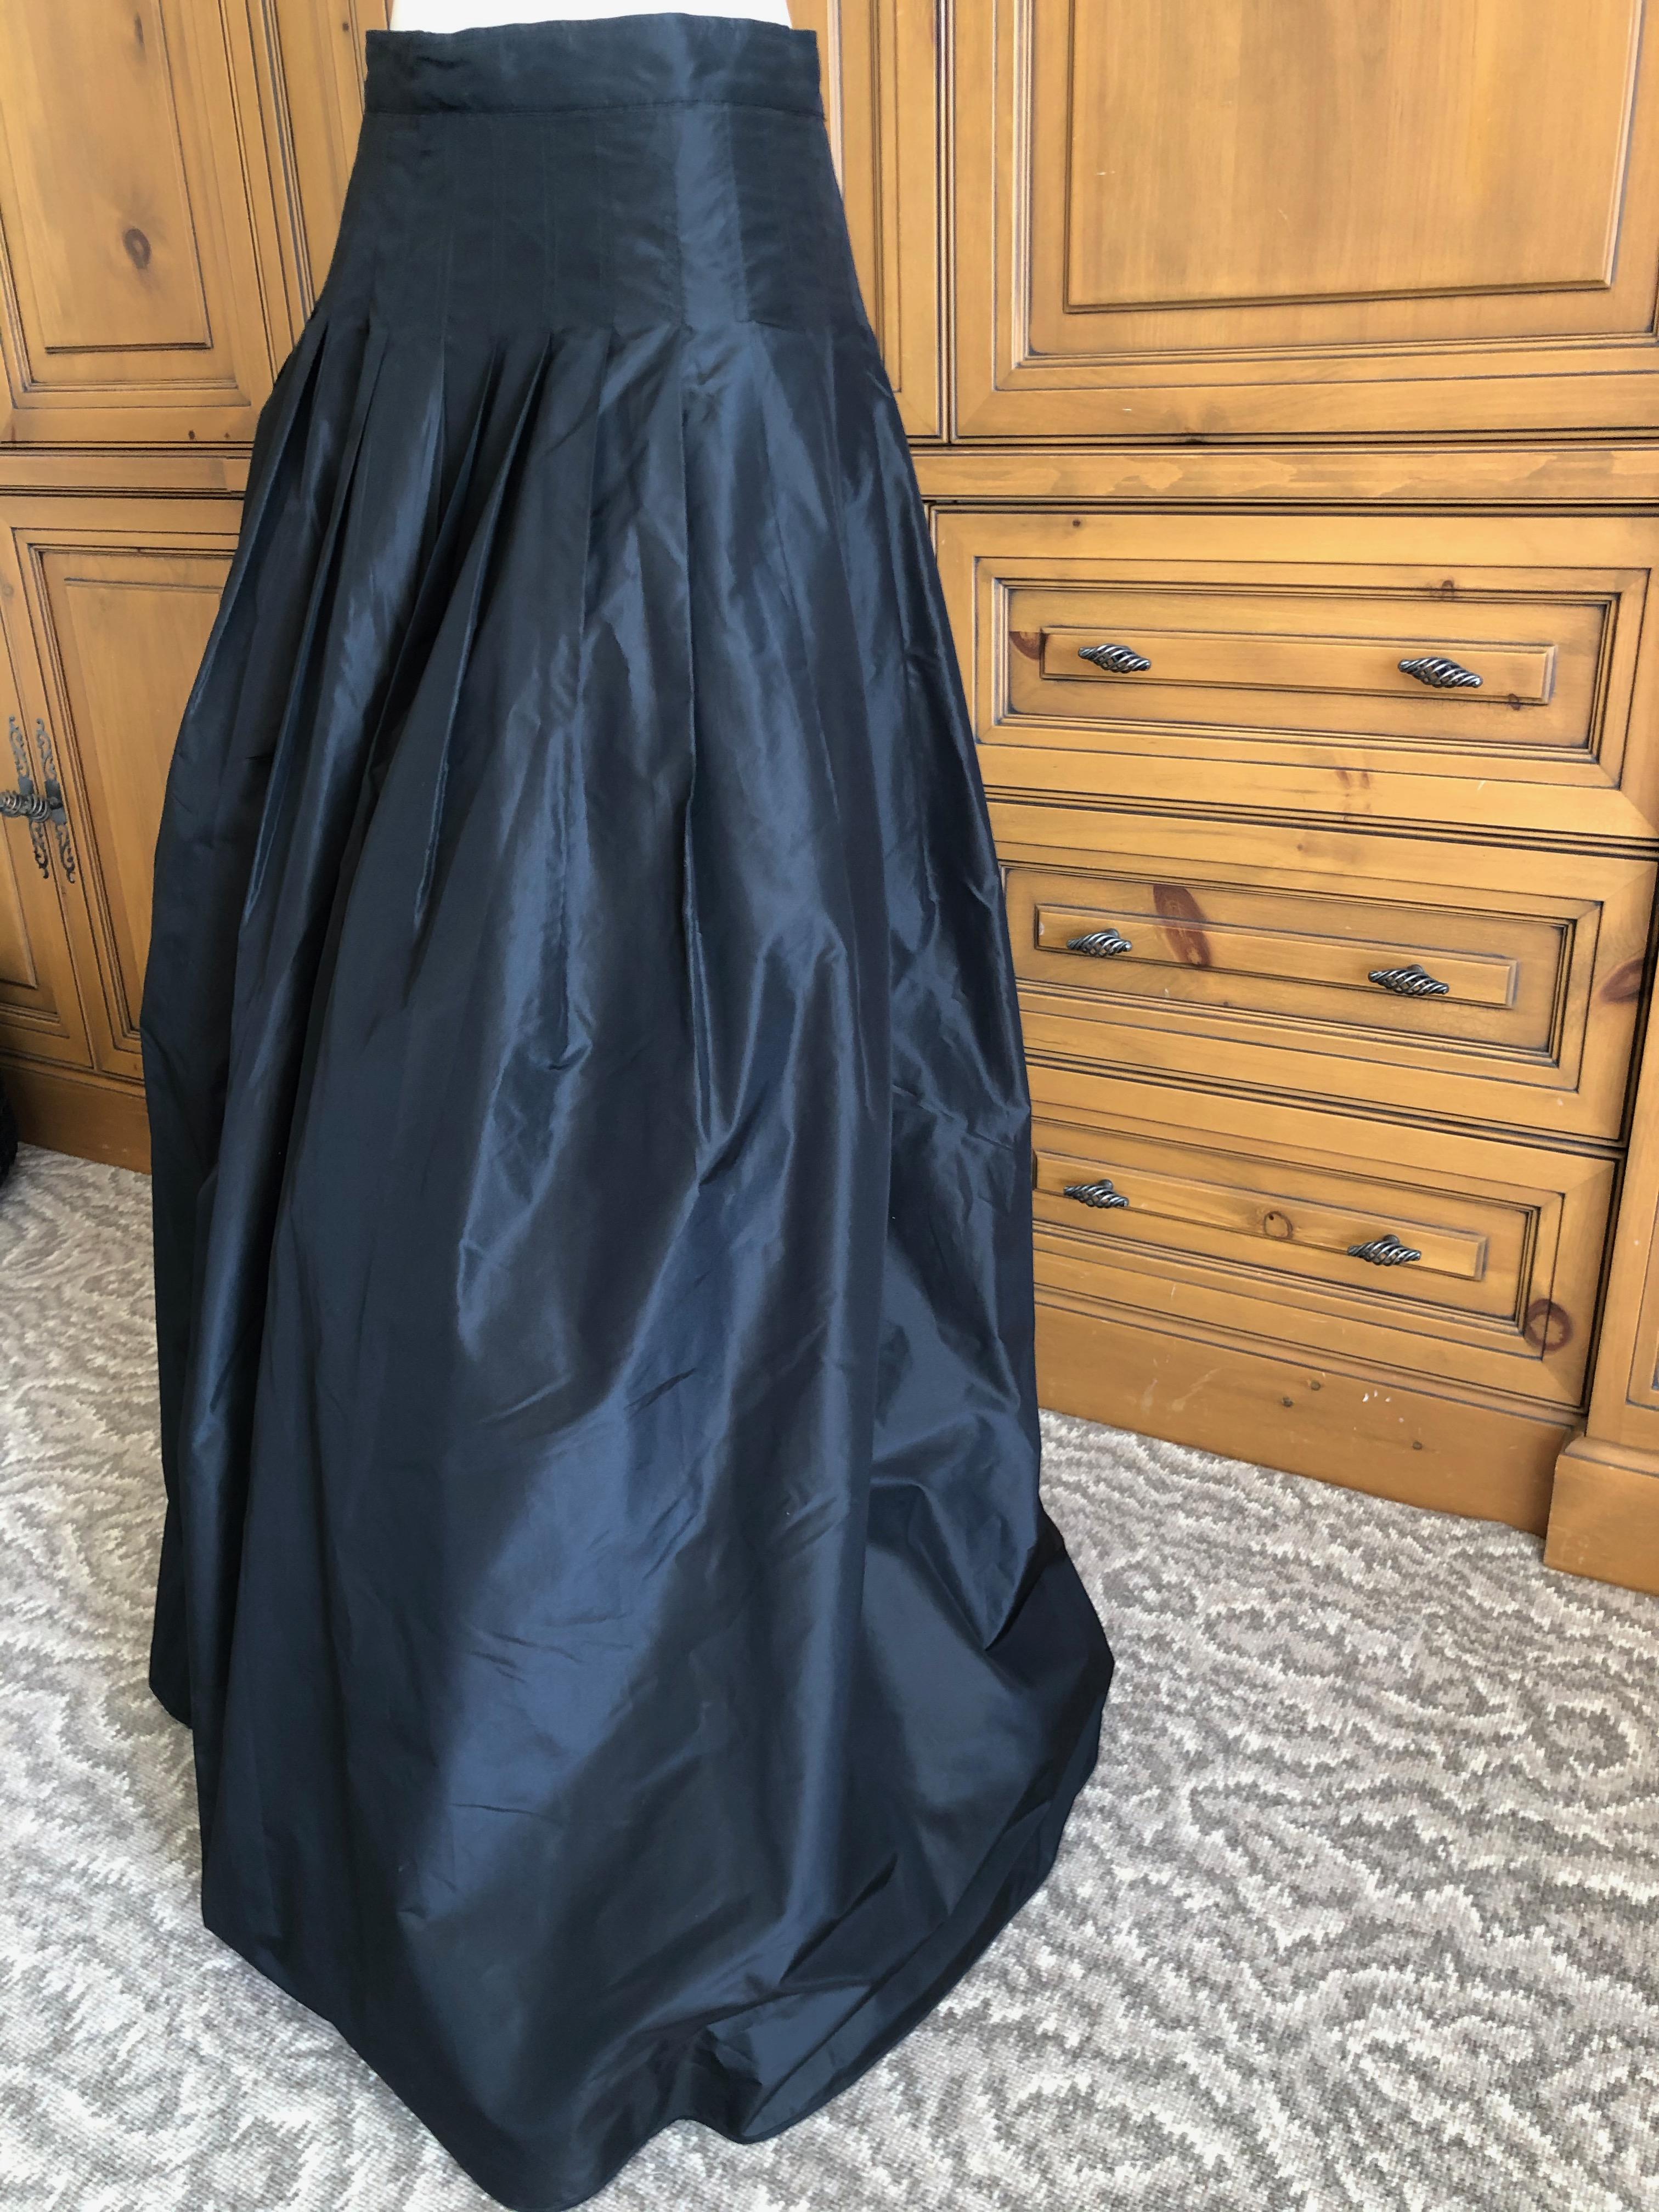 Ungaro Elegant Silk Taffeta Black Ball Skirt with Tulle and Horsehair Underskirt In Excellent Condition For Sale In Cloverdale, CA